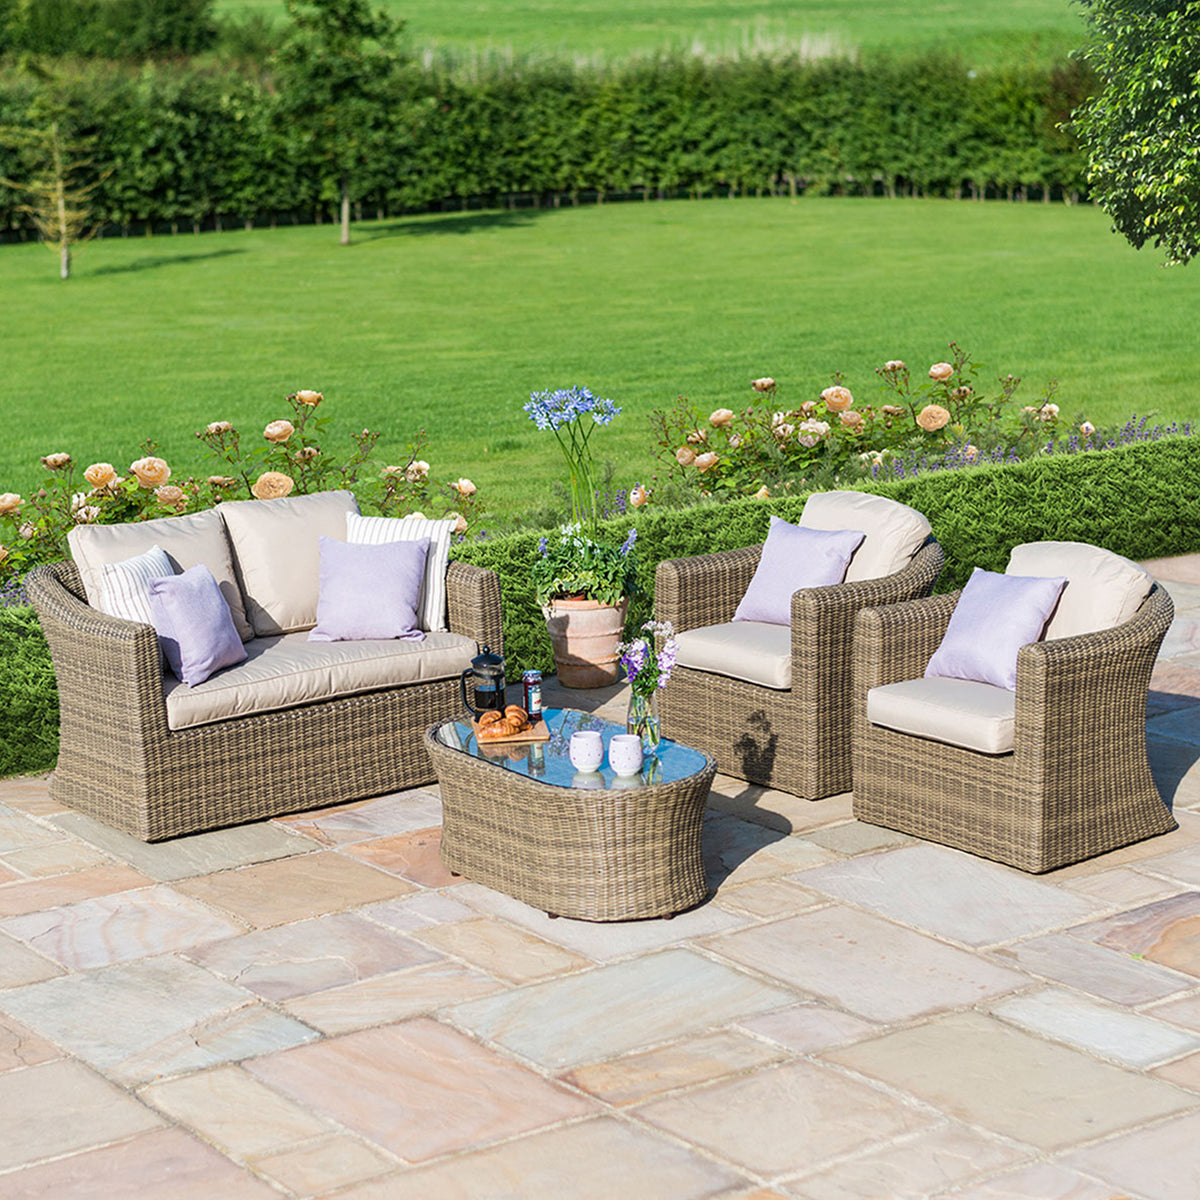 Maze Winchester 2 Seat Outdoor Rattan Sofa Set from Roseland Furniture